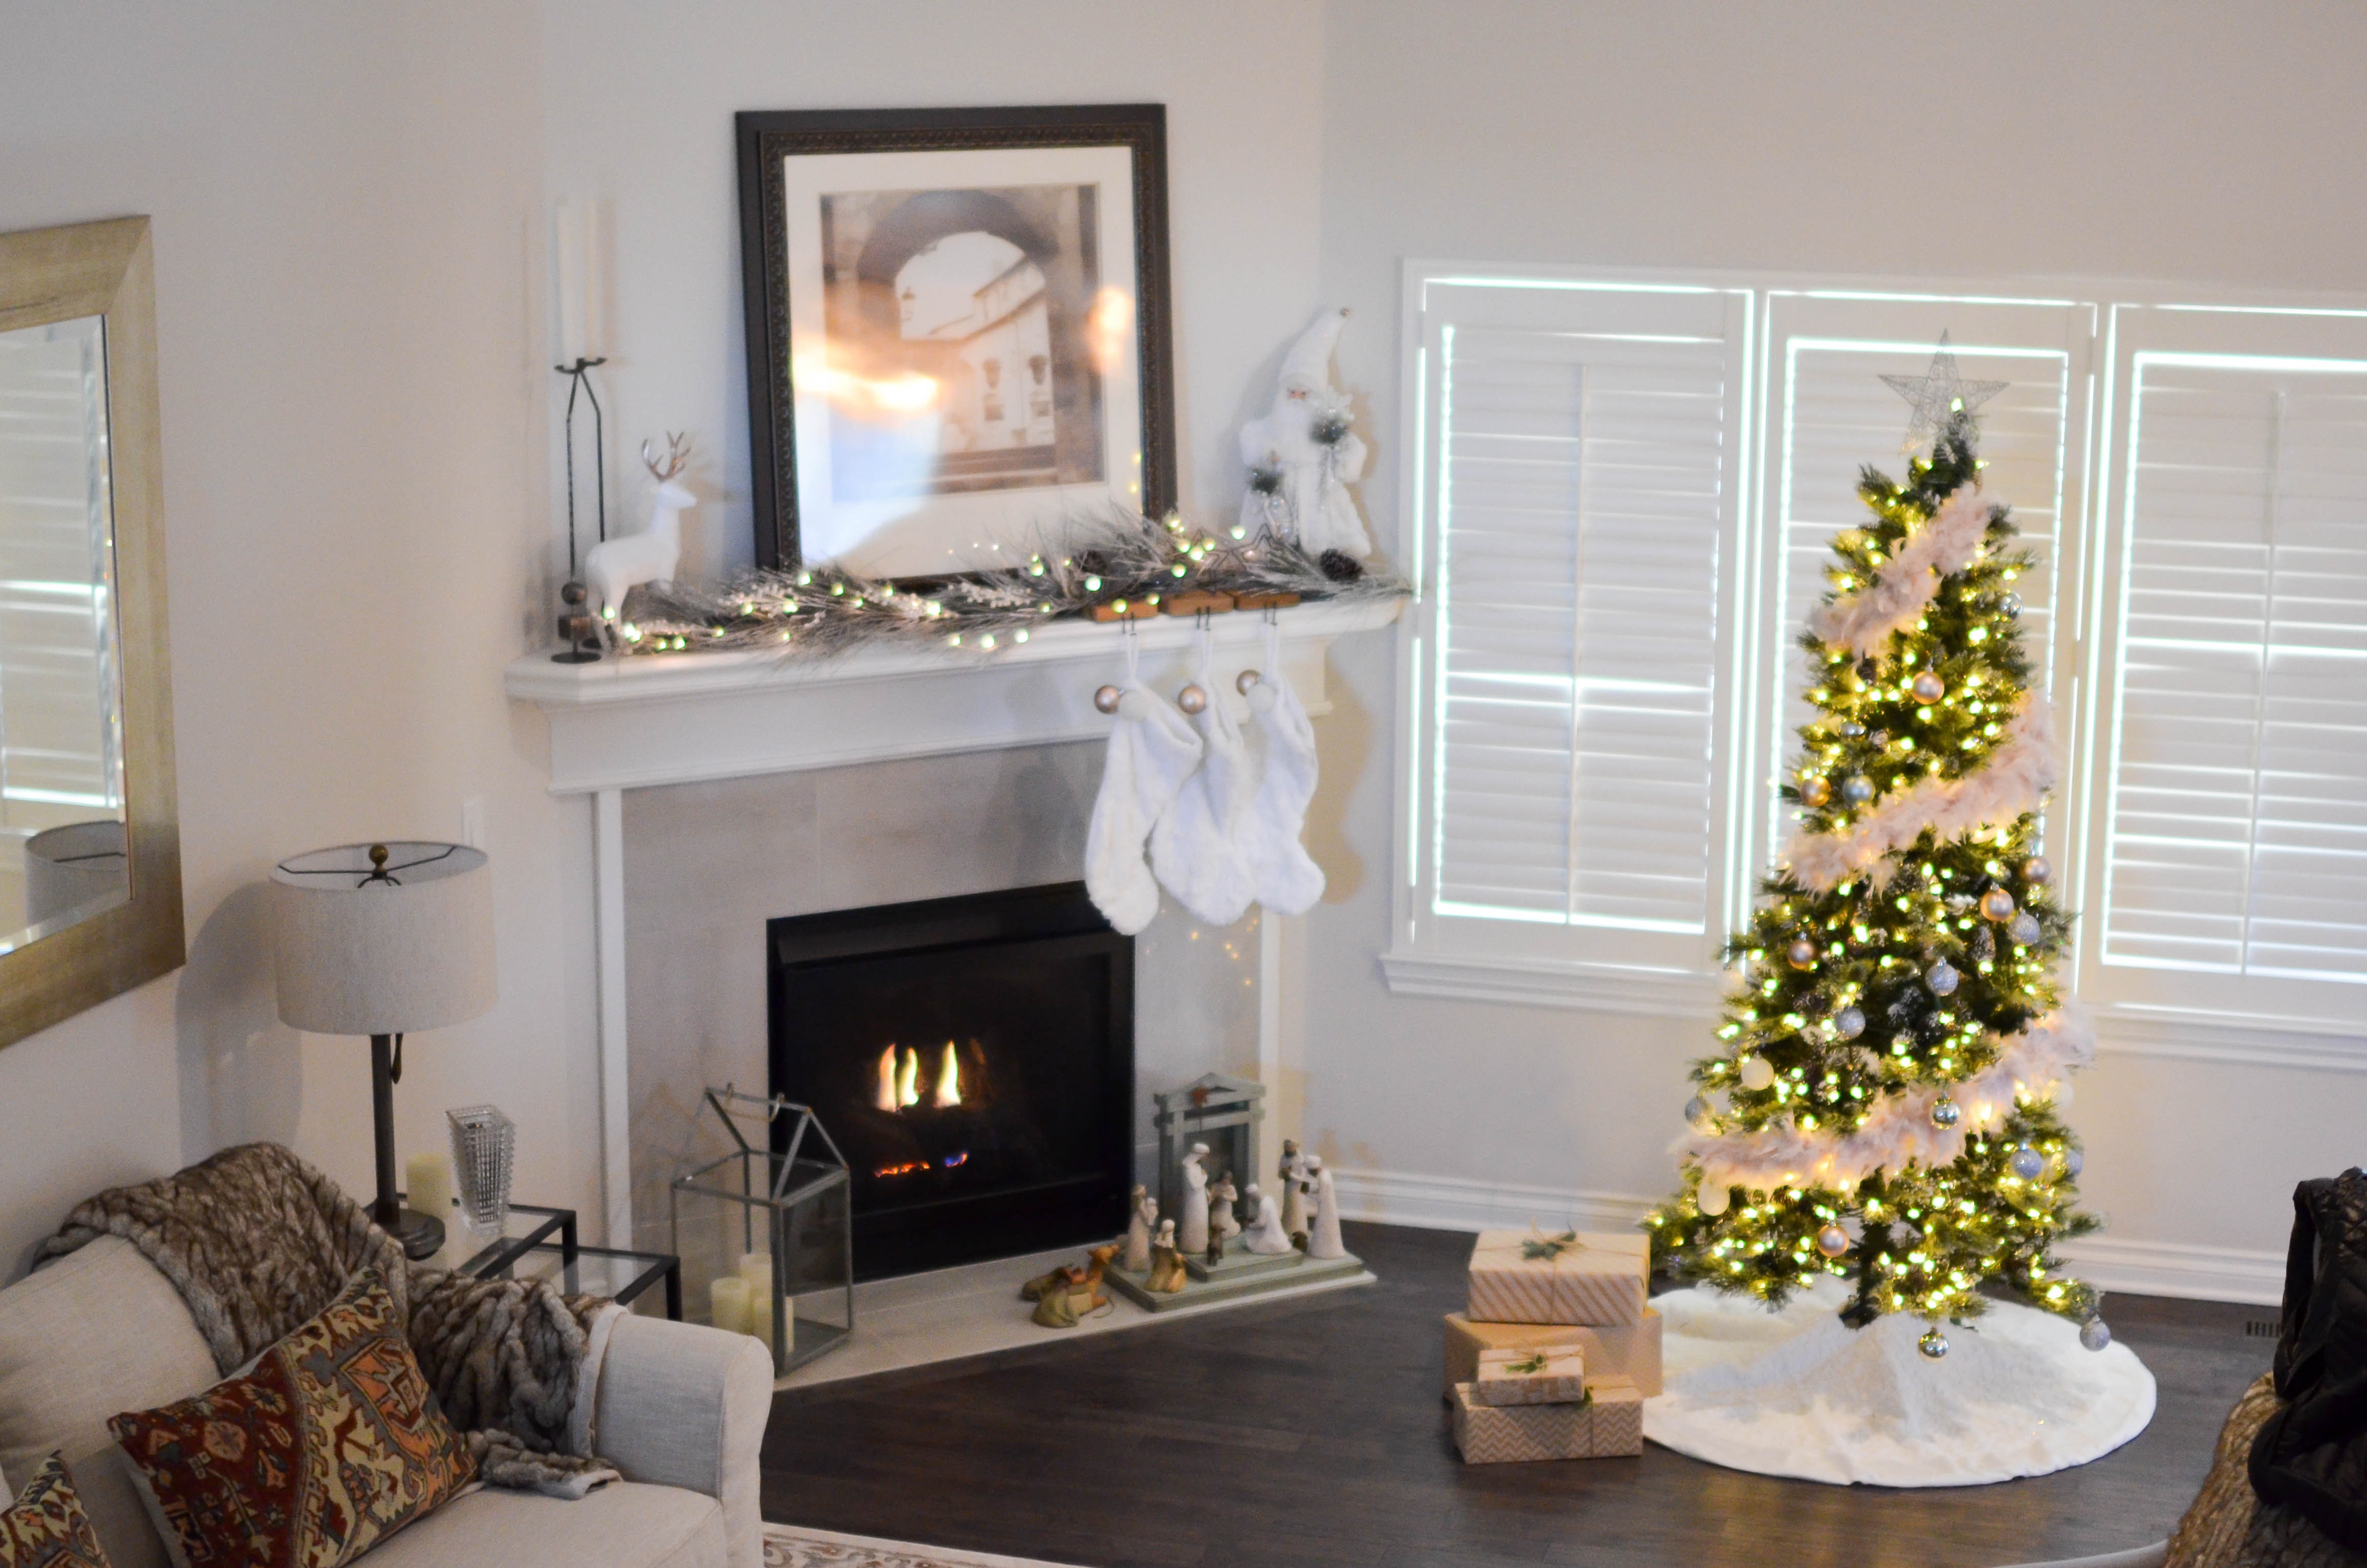 Green and white pre-lit pine tree near fireplace inside well lit room photo